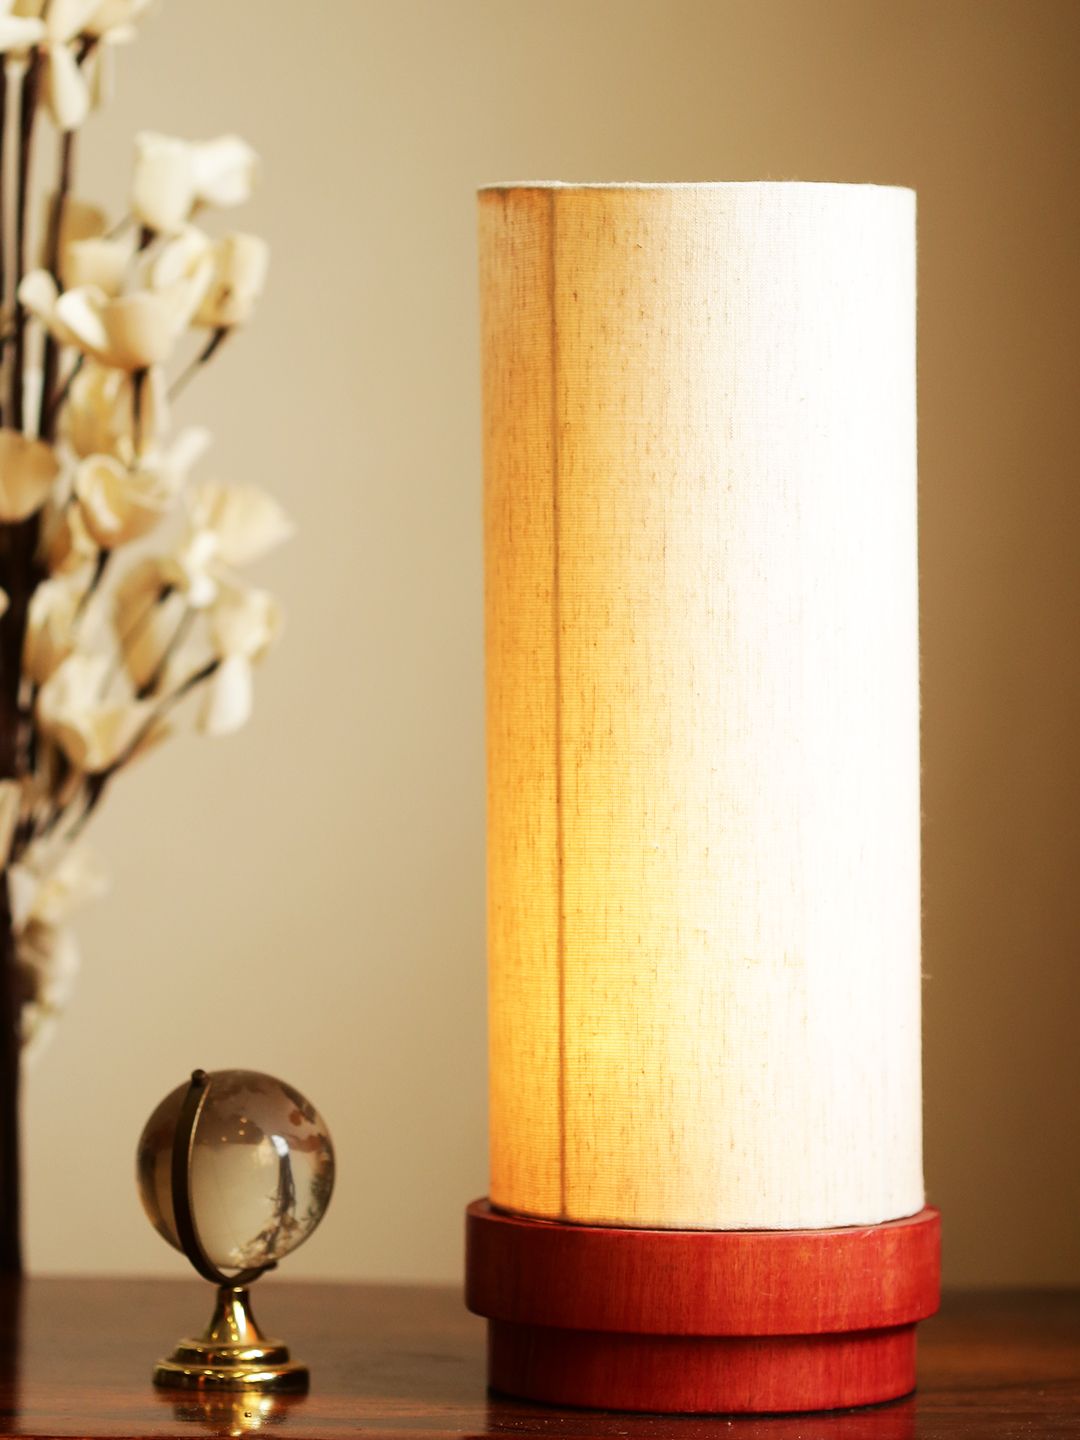 ExclusiveLane Cream-Coloured & Maroon 14 Inch Wooden Column Table Lamp with Shade Price in India